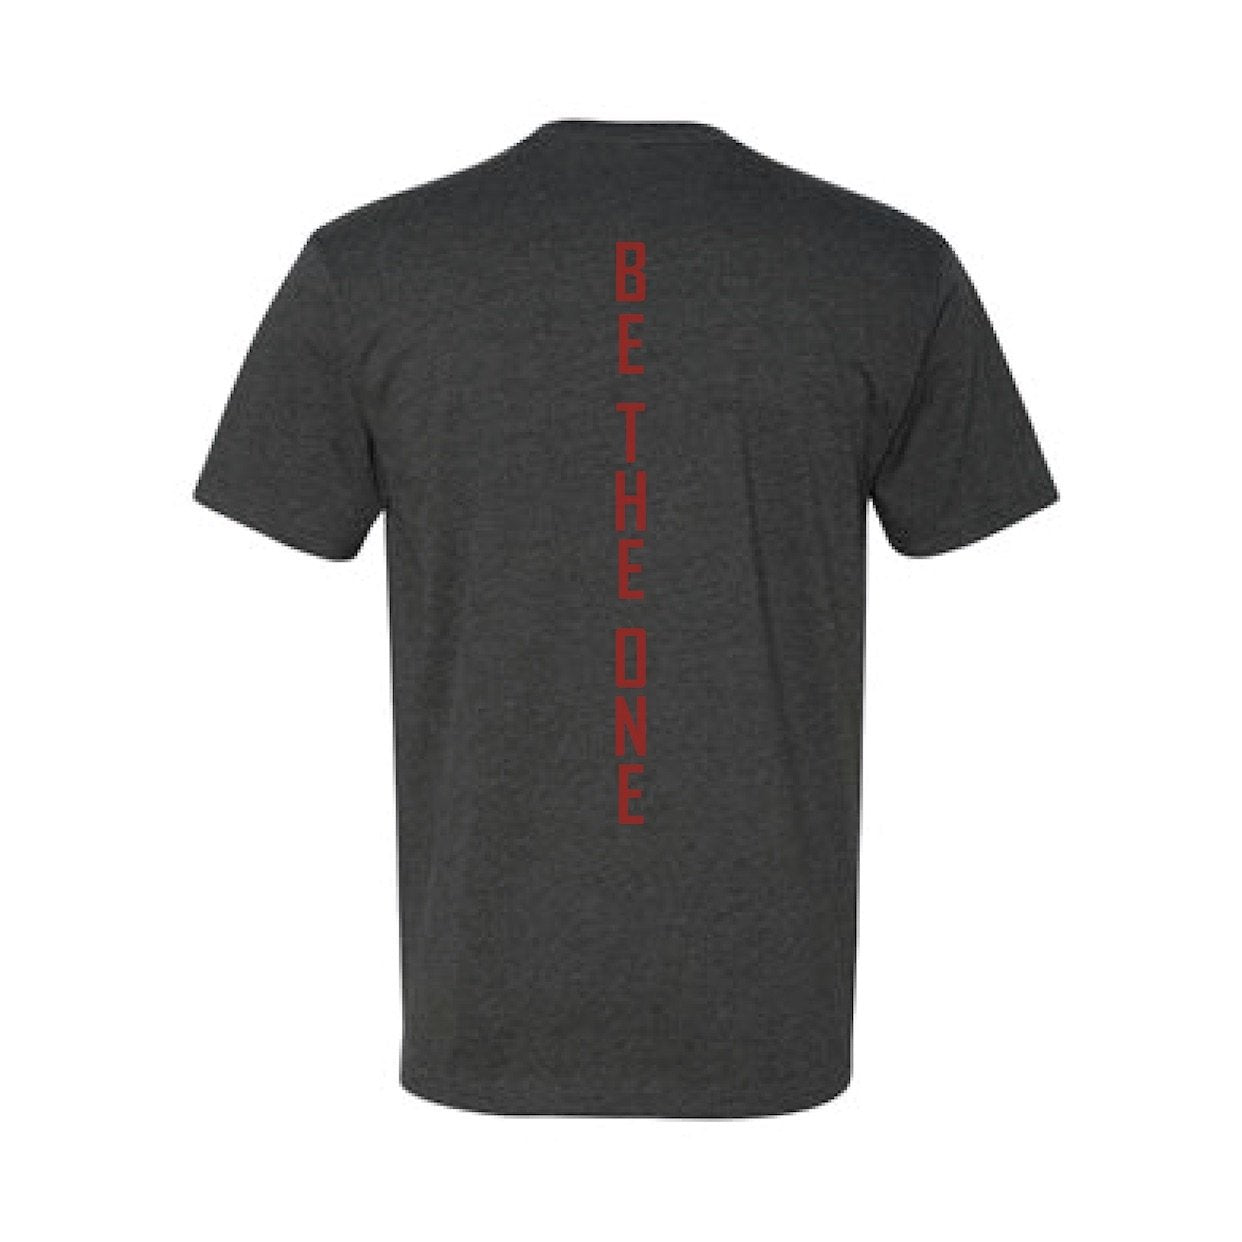 Be The One (on spine w/arrows) - Charcoal gray w/ red